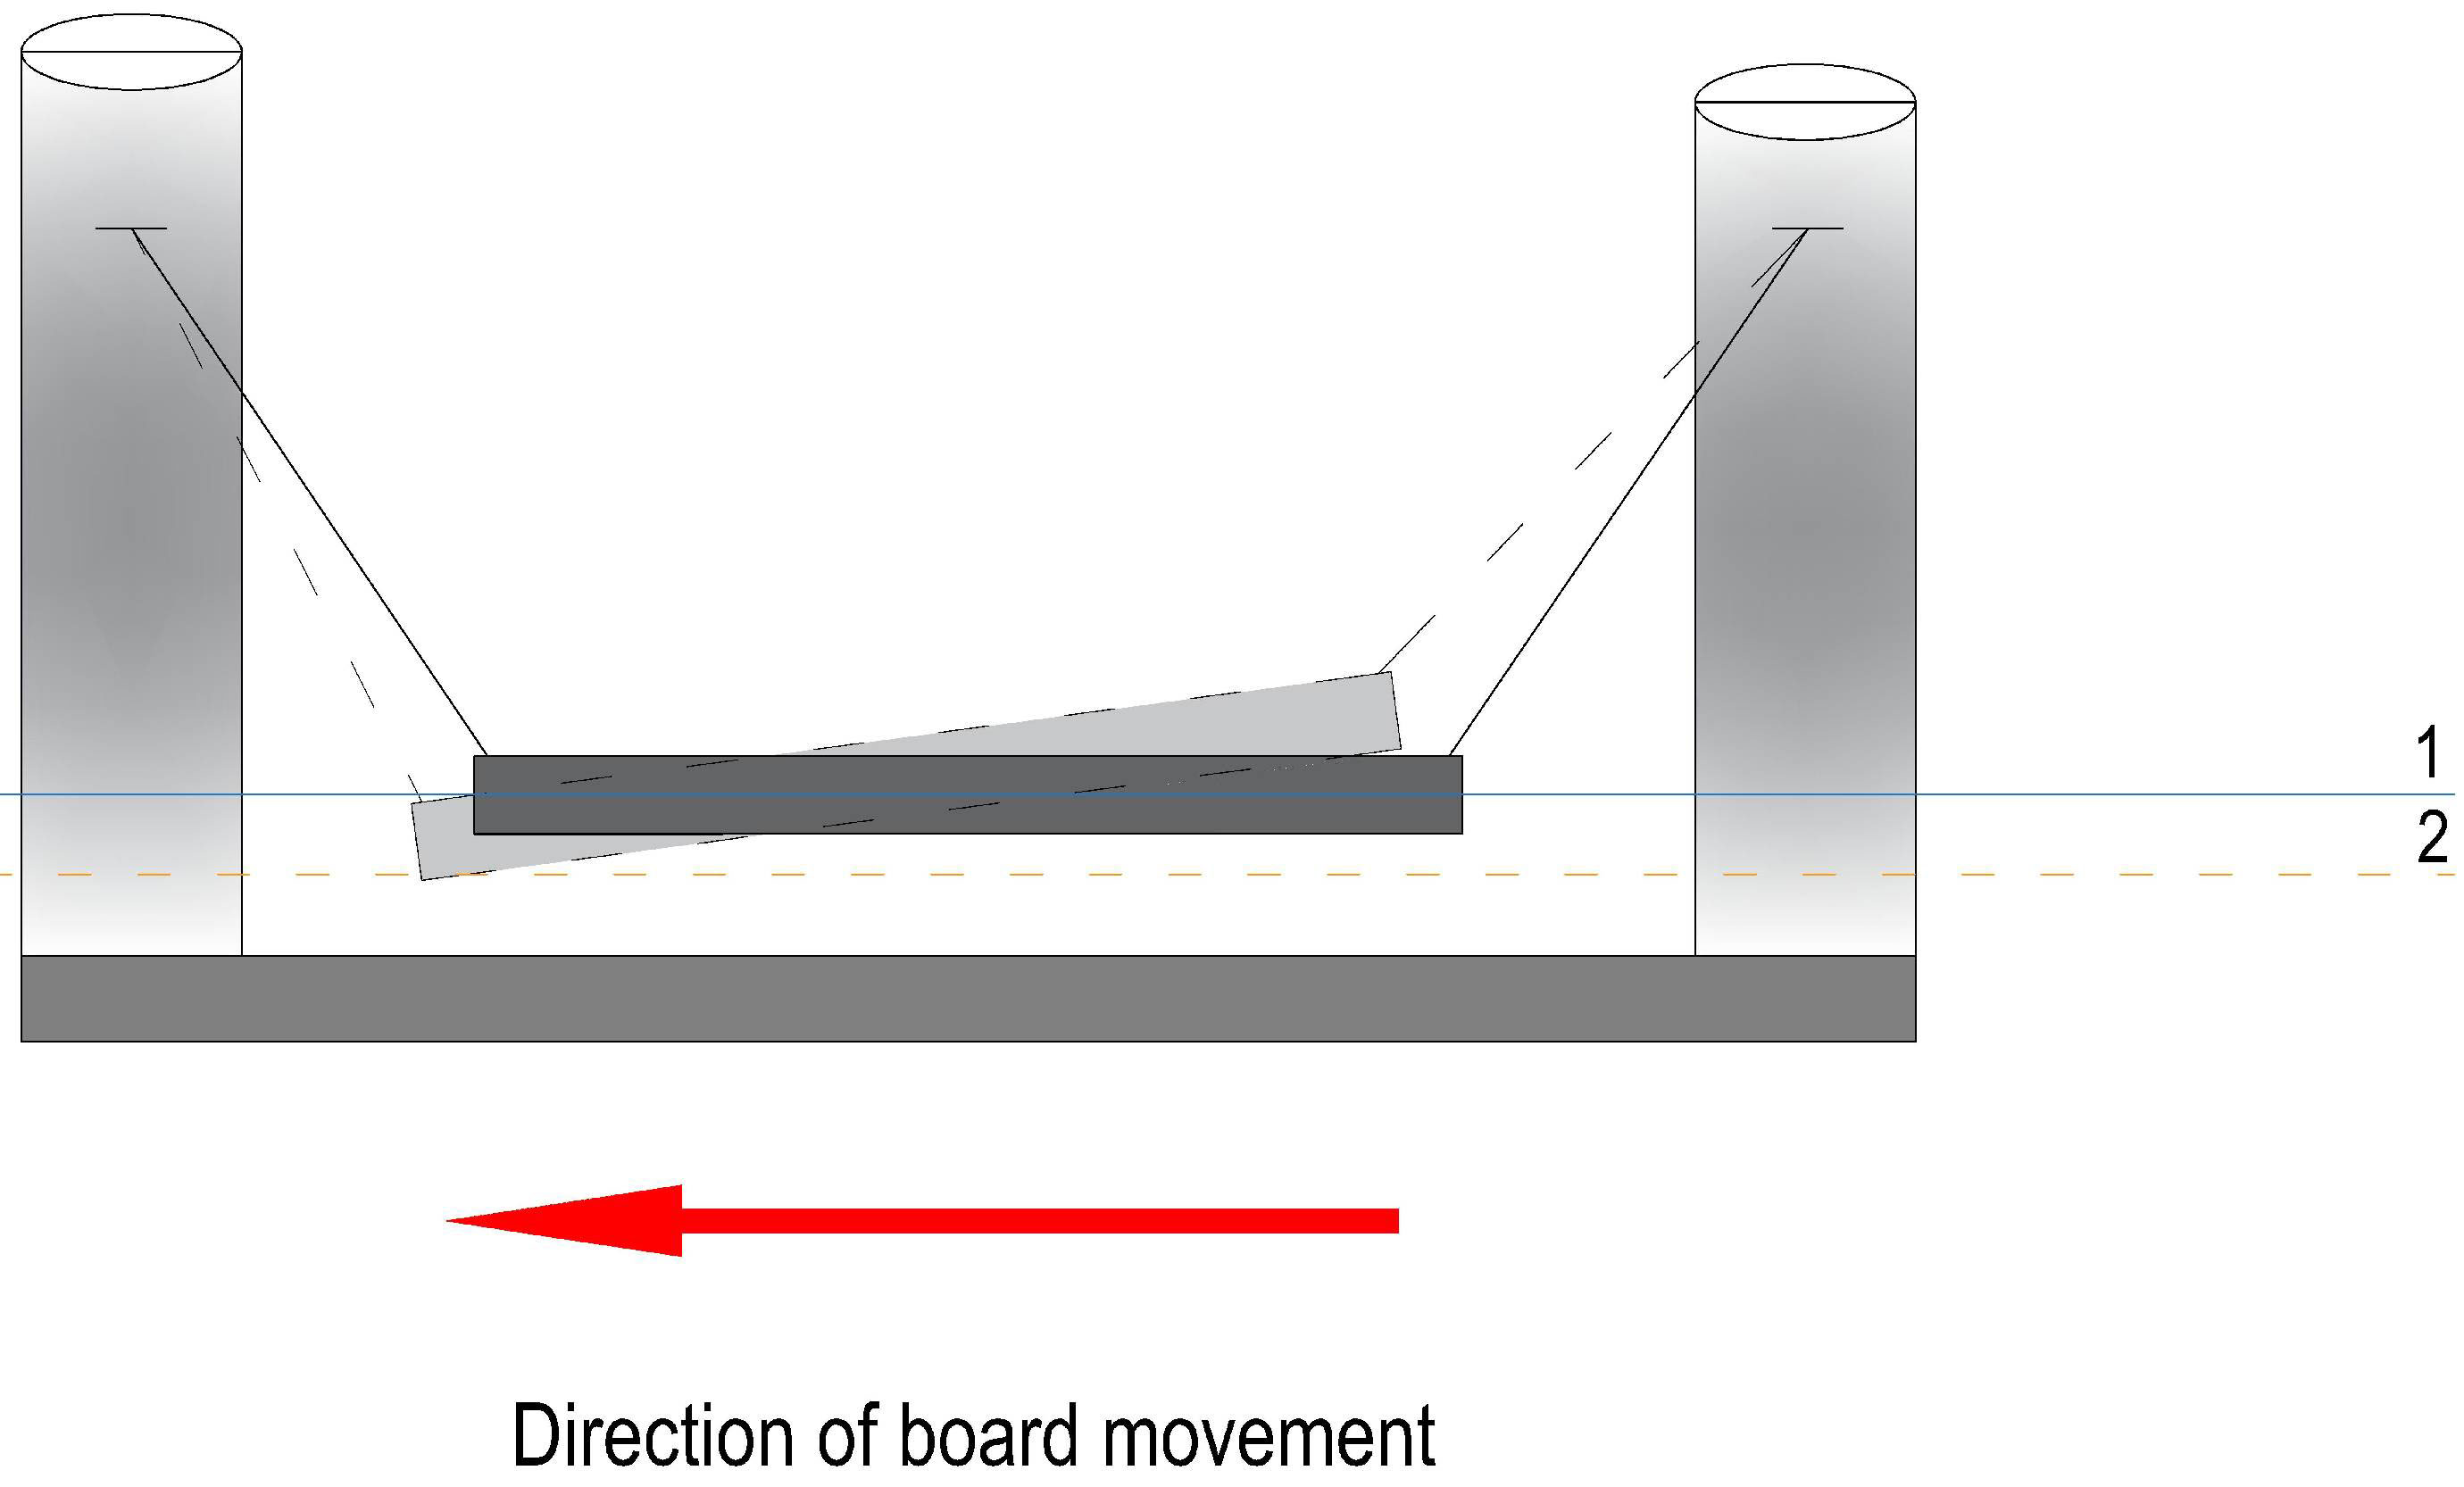 The solid line shows the position of the platform at equilibrium. The dotted line shows the movement of the platform in the A-P directions and the formation of the slope of the plane. Solid line no. 1 shows the height of the board in the neutral position. Dotted line no. 2 shows the height of the board end approaching the frame (below the former neutral position). 